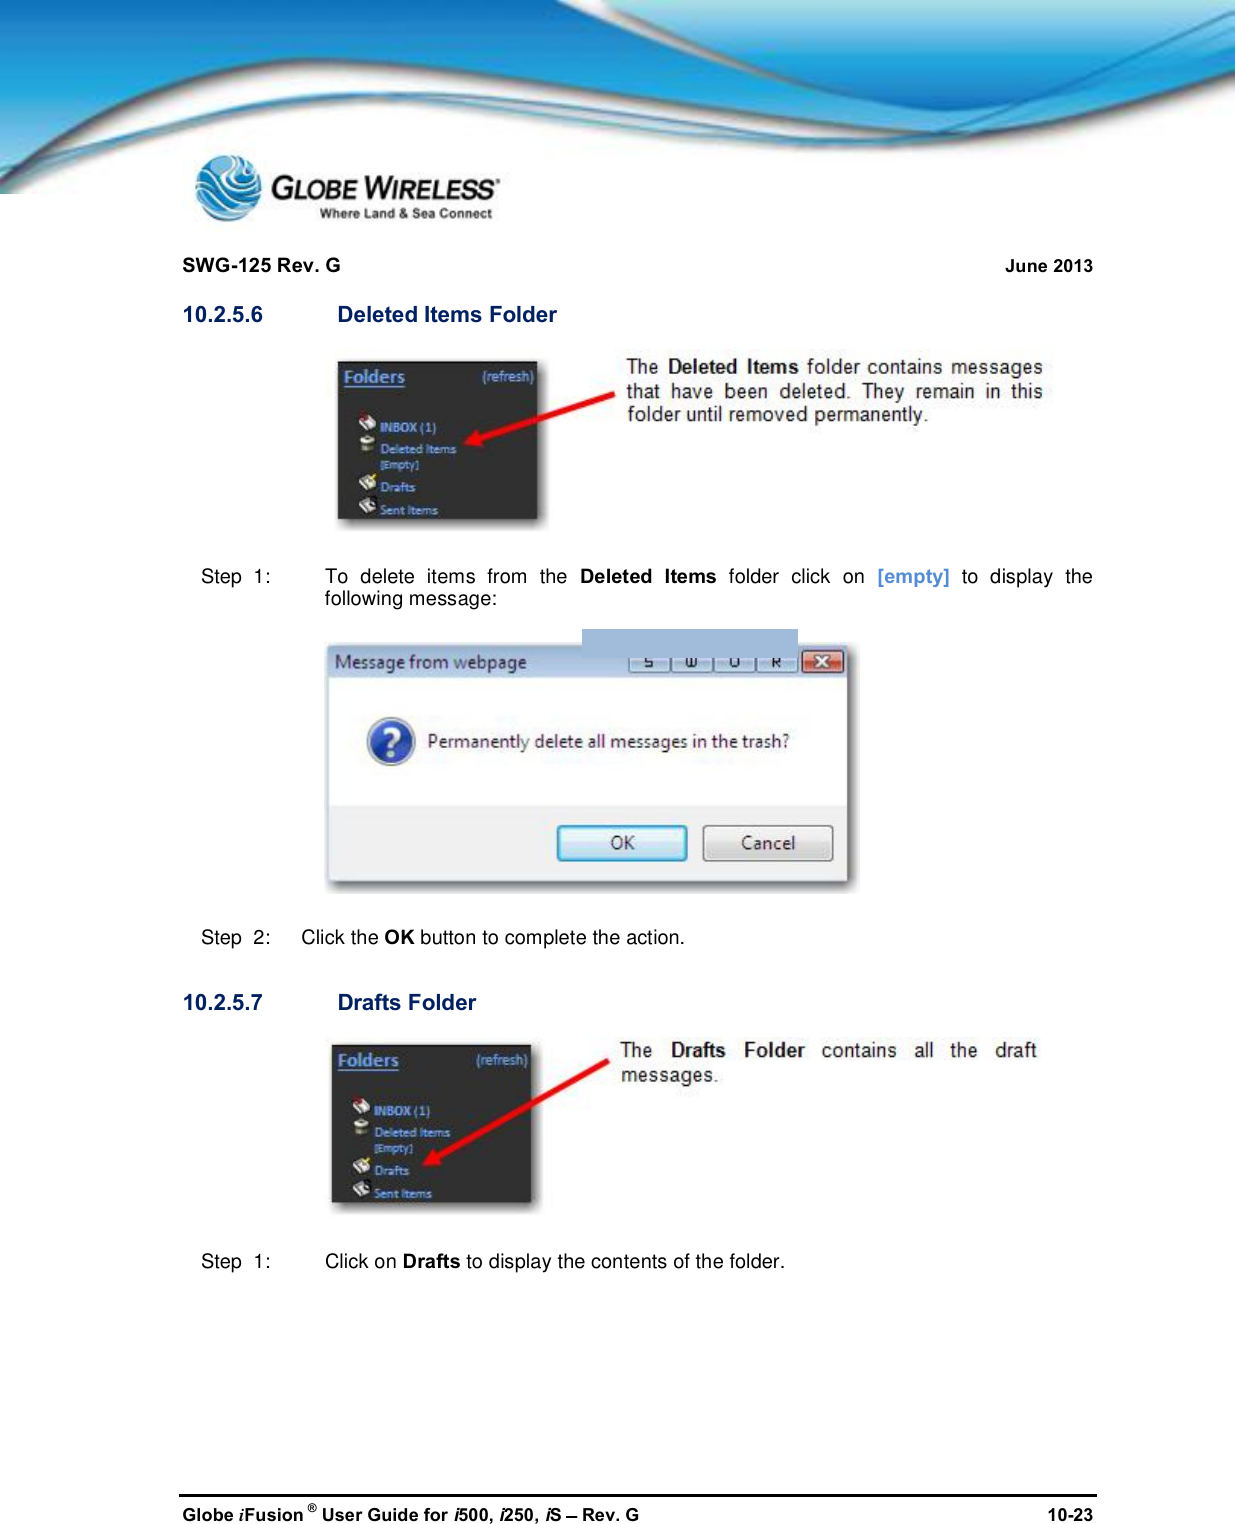 SWG-125 Rev. G June 2013Globe iFusion ®User Guide for i500, i250, iSRev. G 10-2310.2.5.6 Deleted Items FolderStep  1: To delete items from the Deleted Items folder click on [empty] to display thefollowing message:Step  2:   Click the OK button to complete the action.10.2.5.7 Drafts FolderStep  1: Click on Drafts to display the contents of the folder.